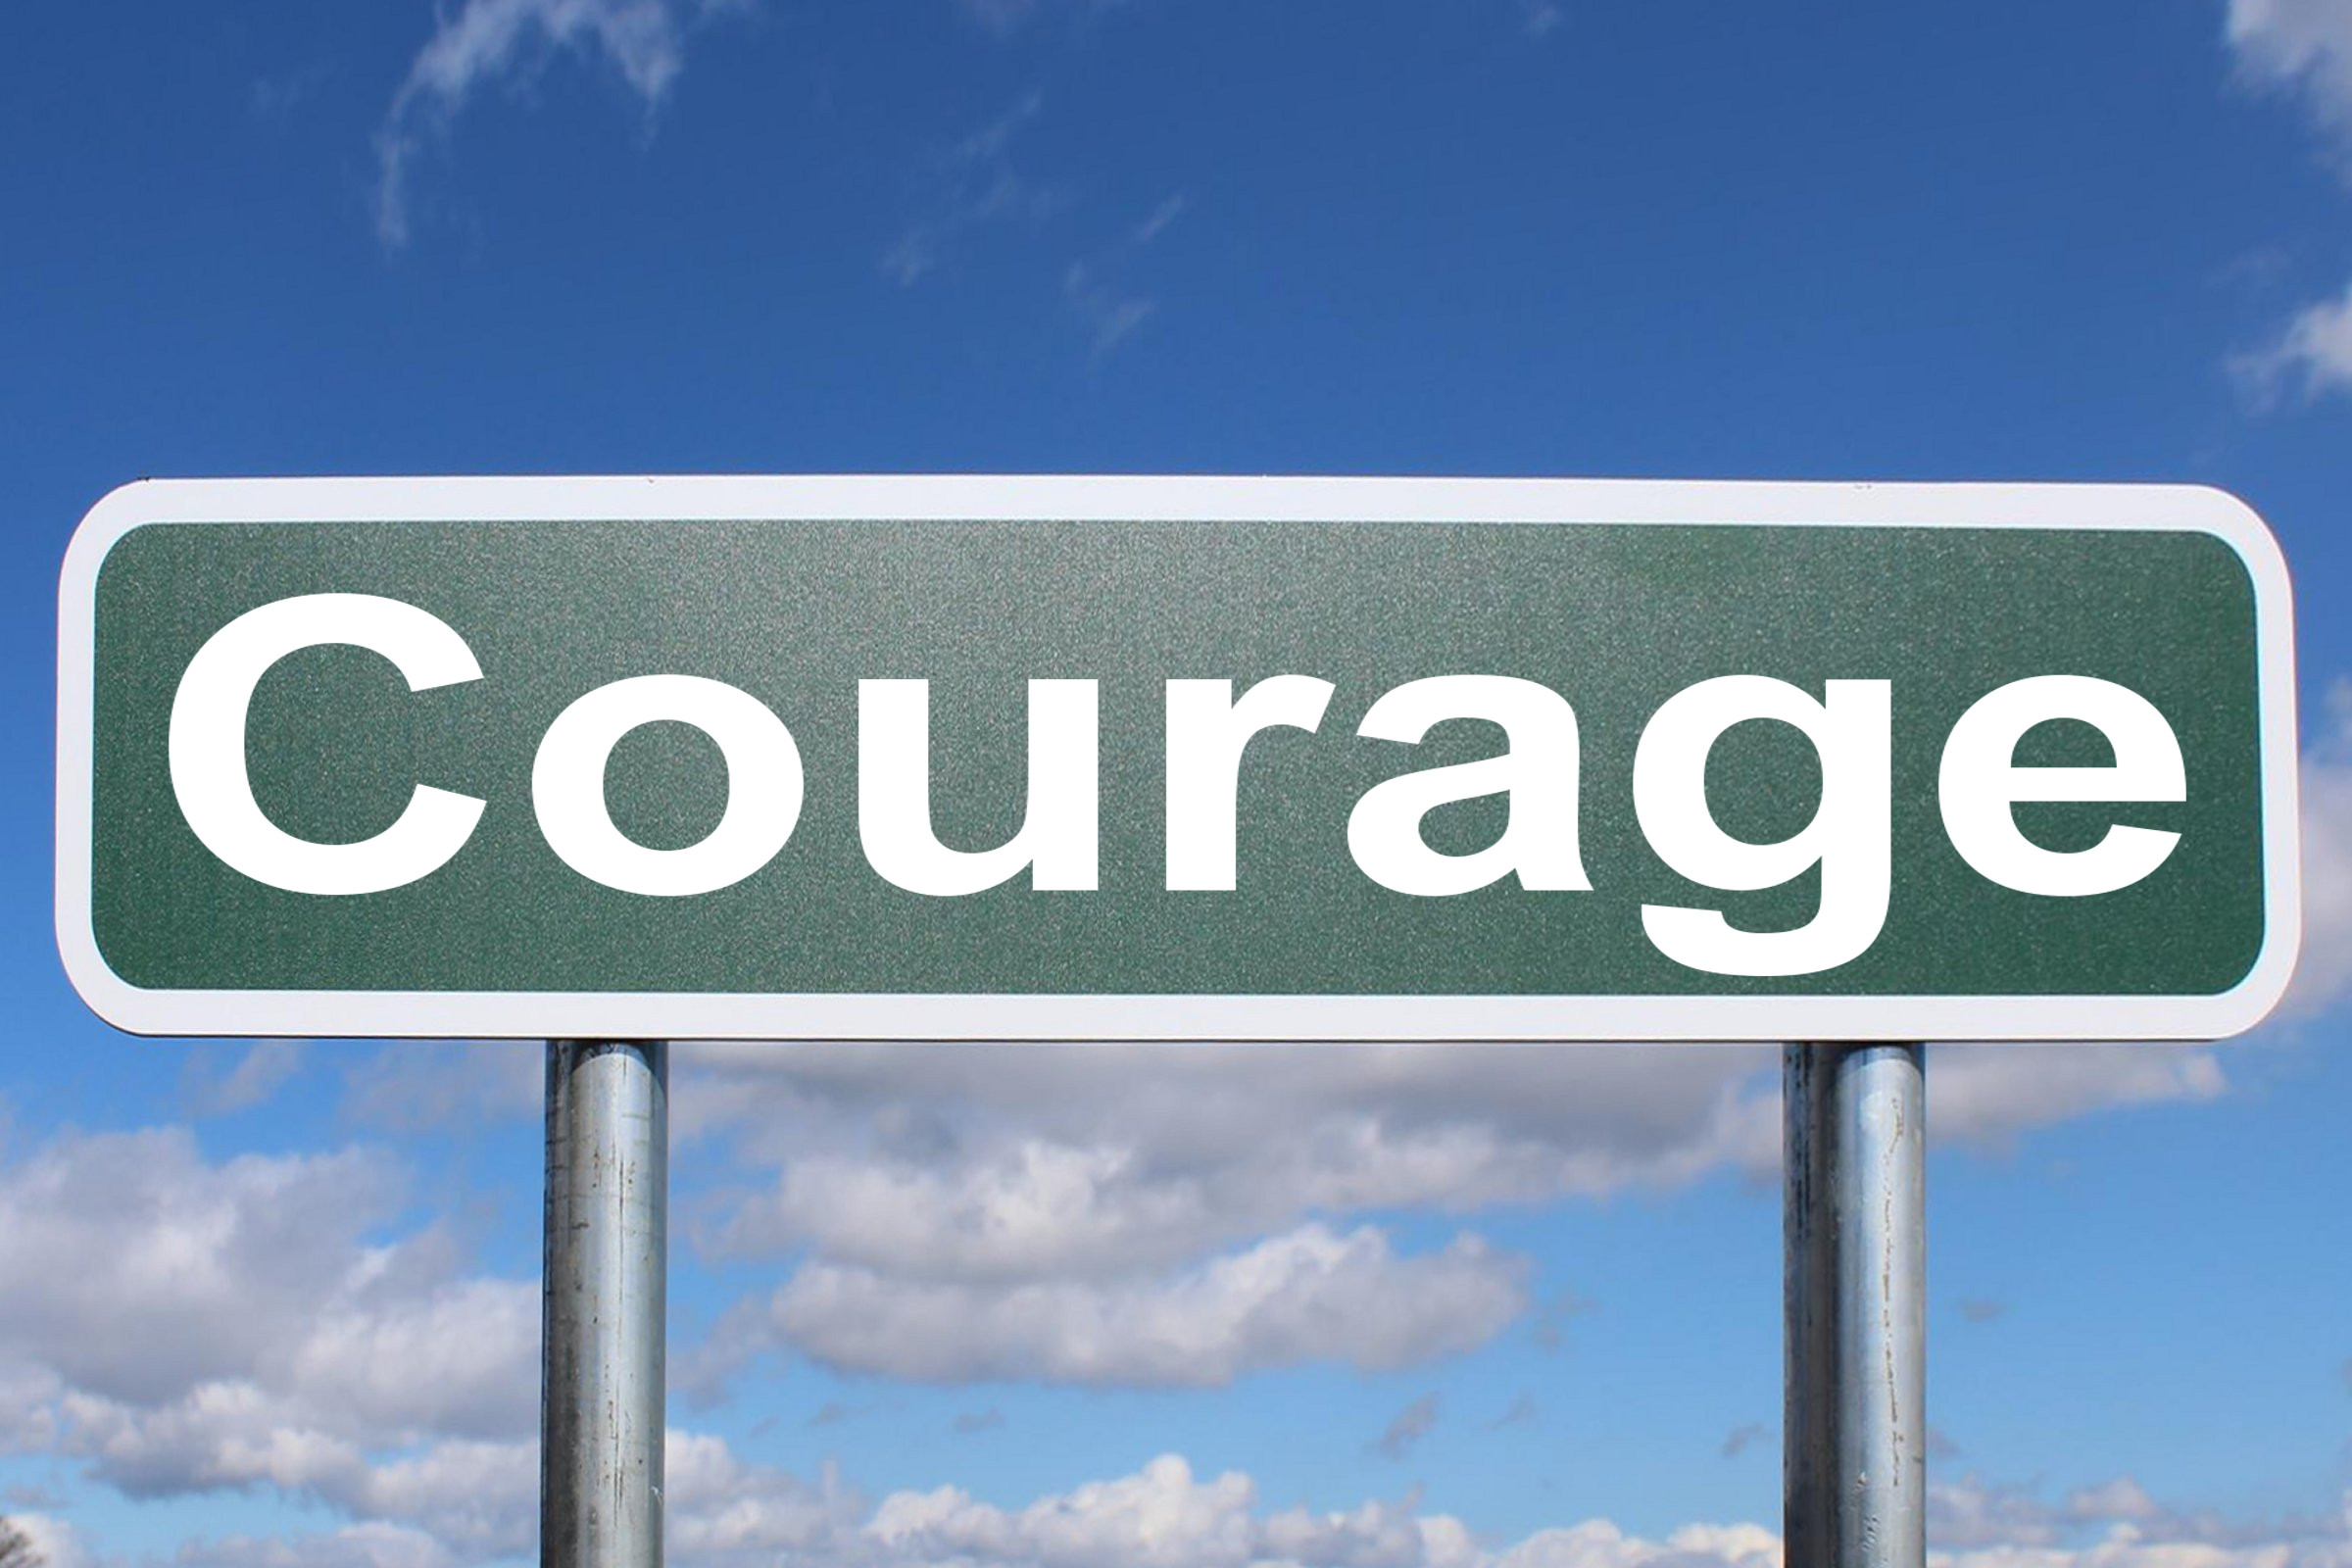 courage